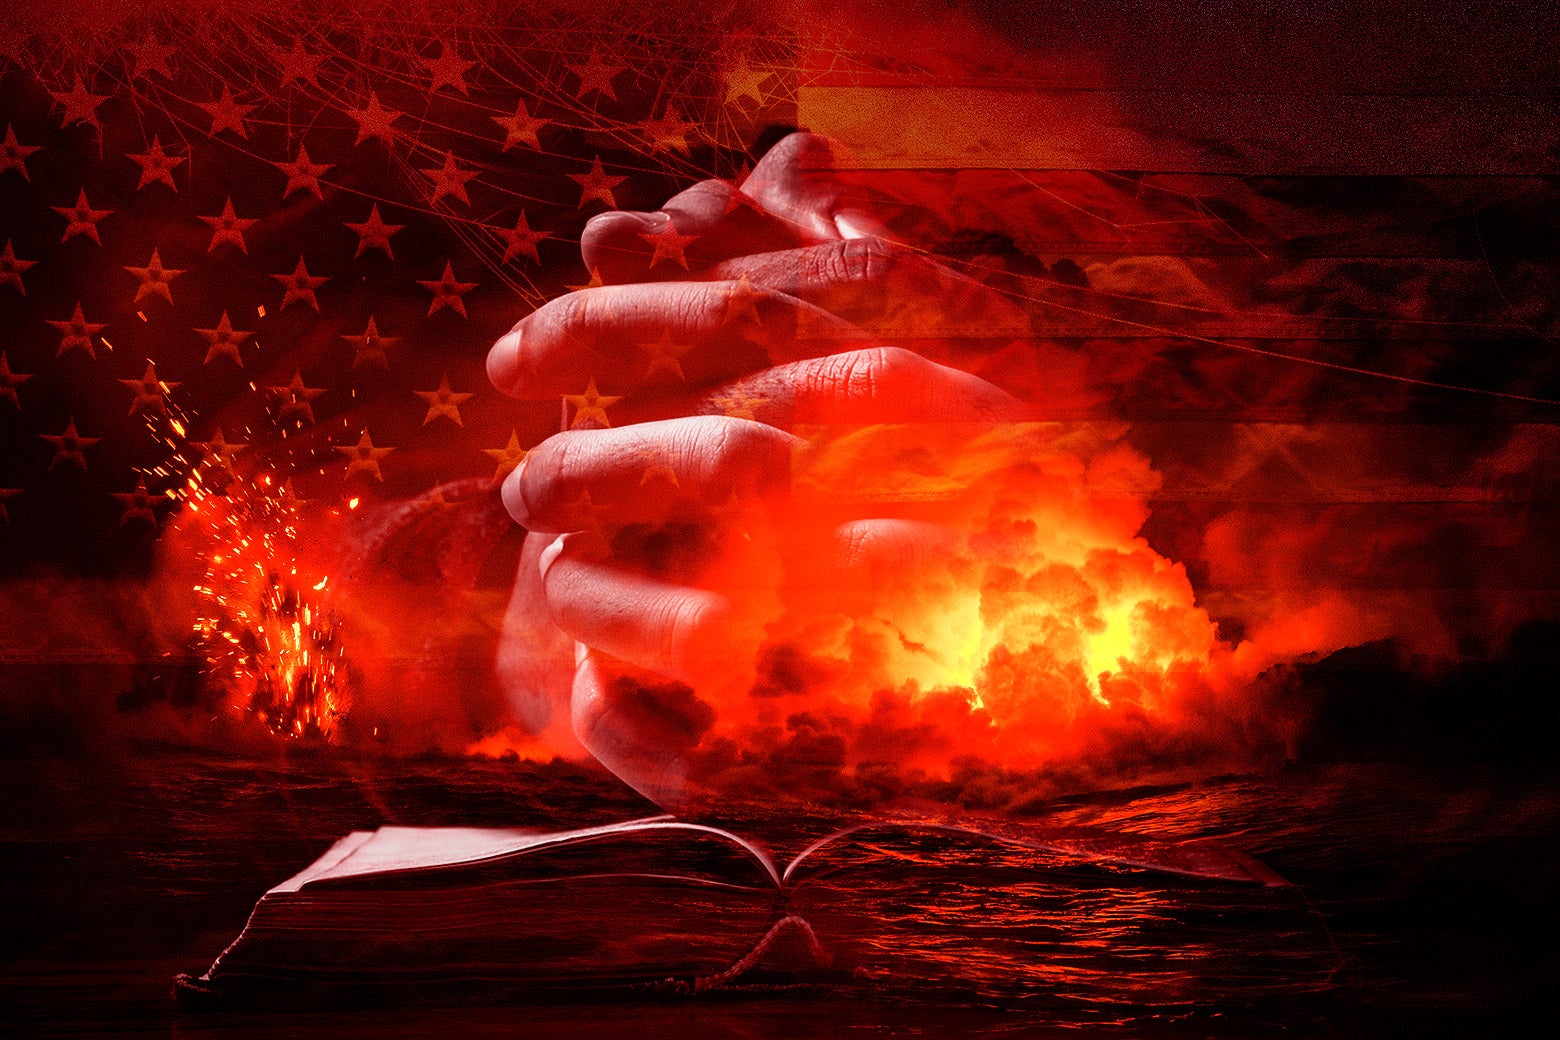 An apocalyptic explosion on the ocean with fire, a burning American flag, and hands folded on top of a bible.